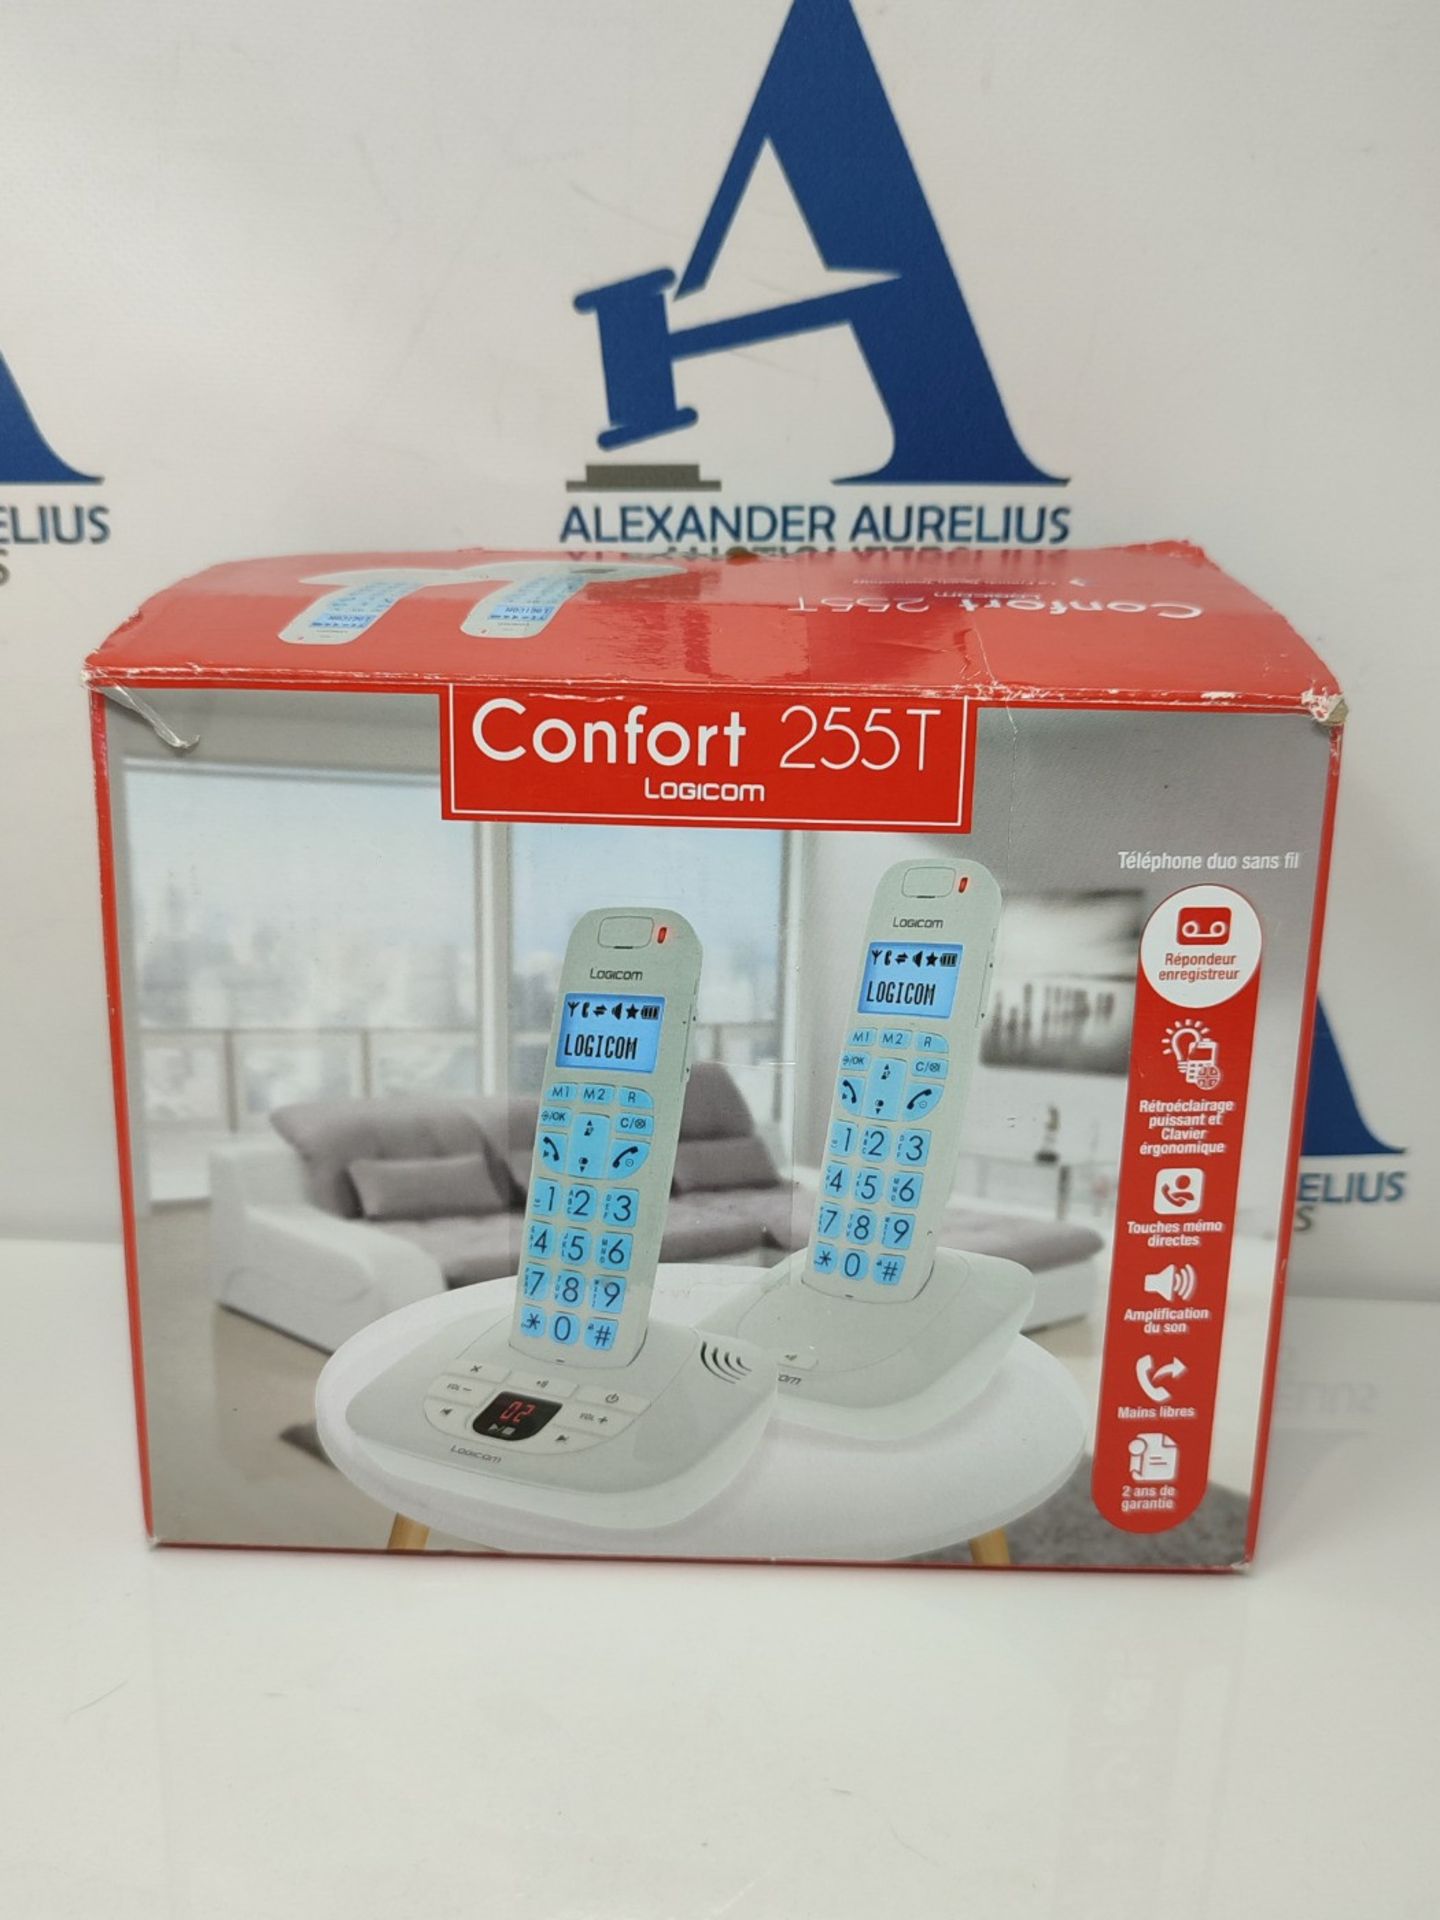 Logicom Confort 255T Dual Cordless Phones with Answering Machine White - Image 2 of 3